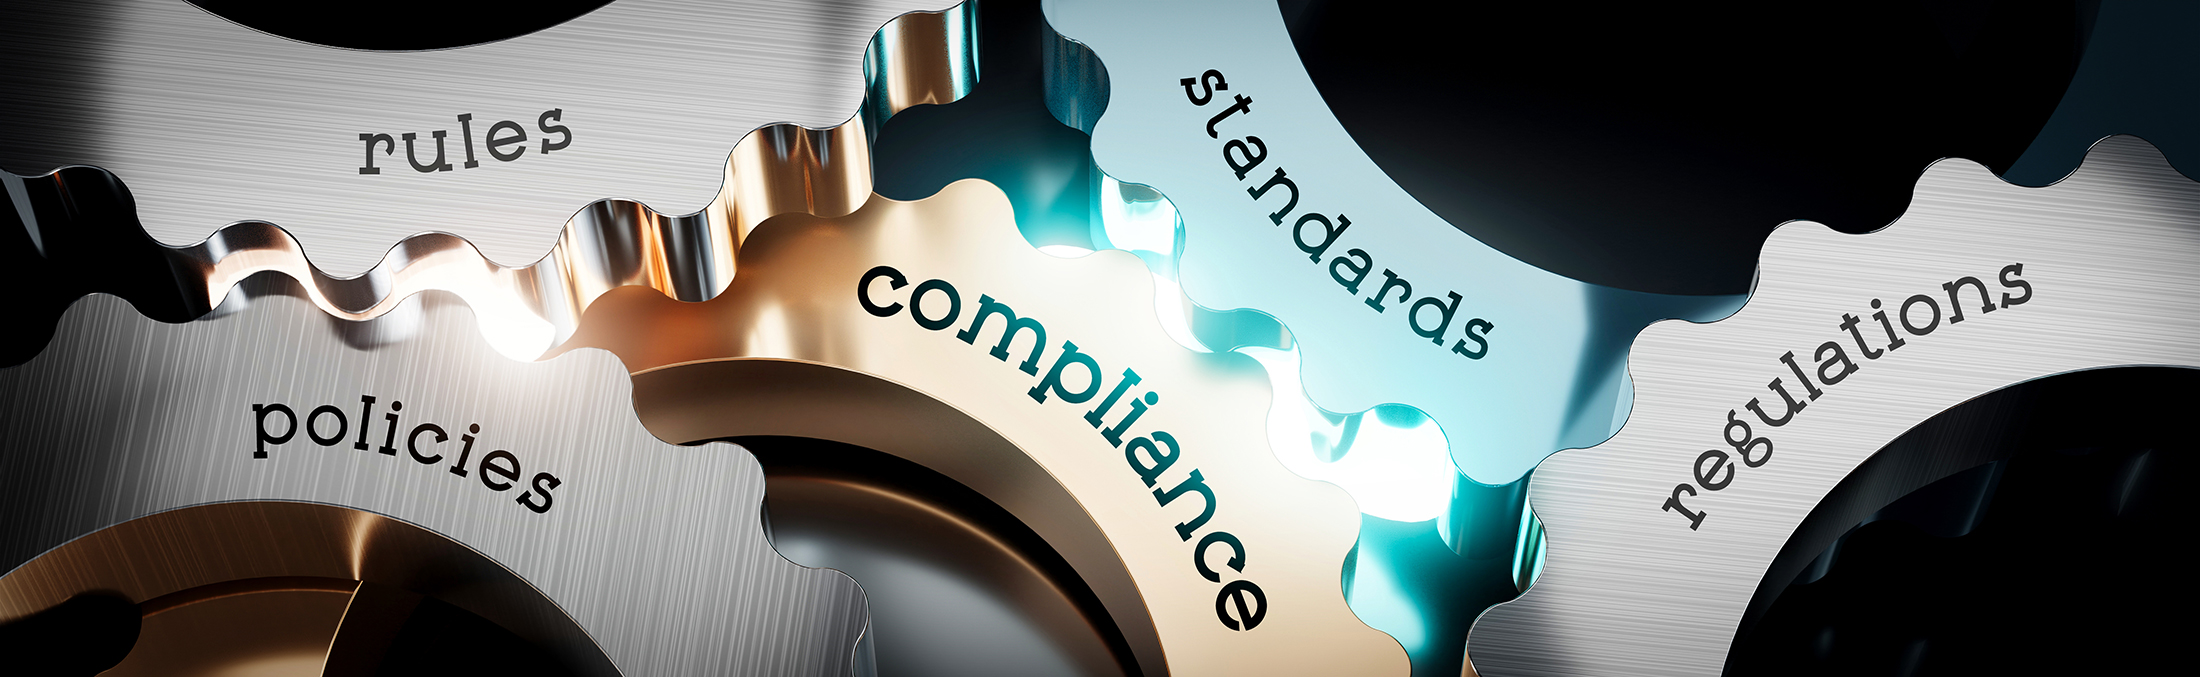 Photo of cogwheels with graphics and words like compliance and standards to represent UPI Safety and Quality Services